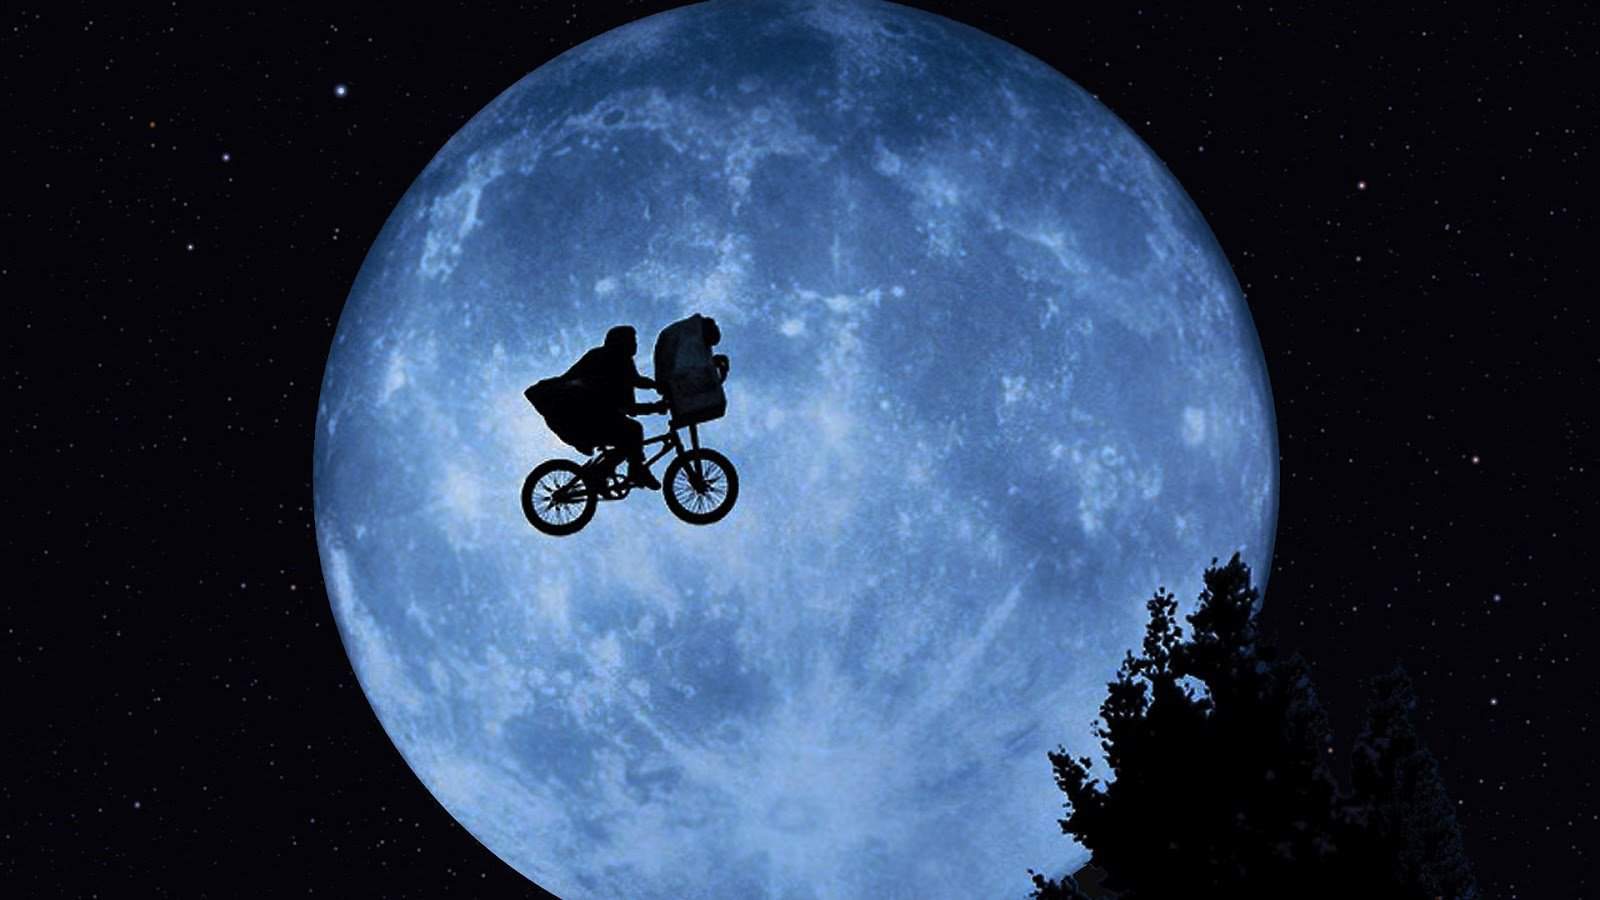 elliott and et in front of the moon